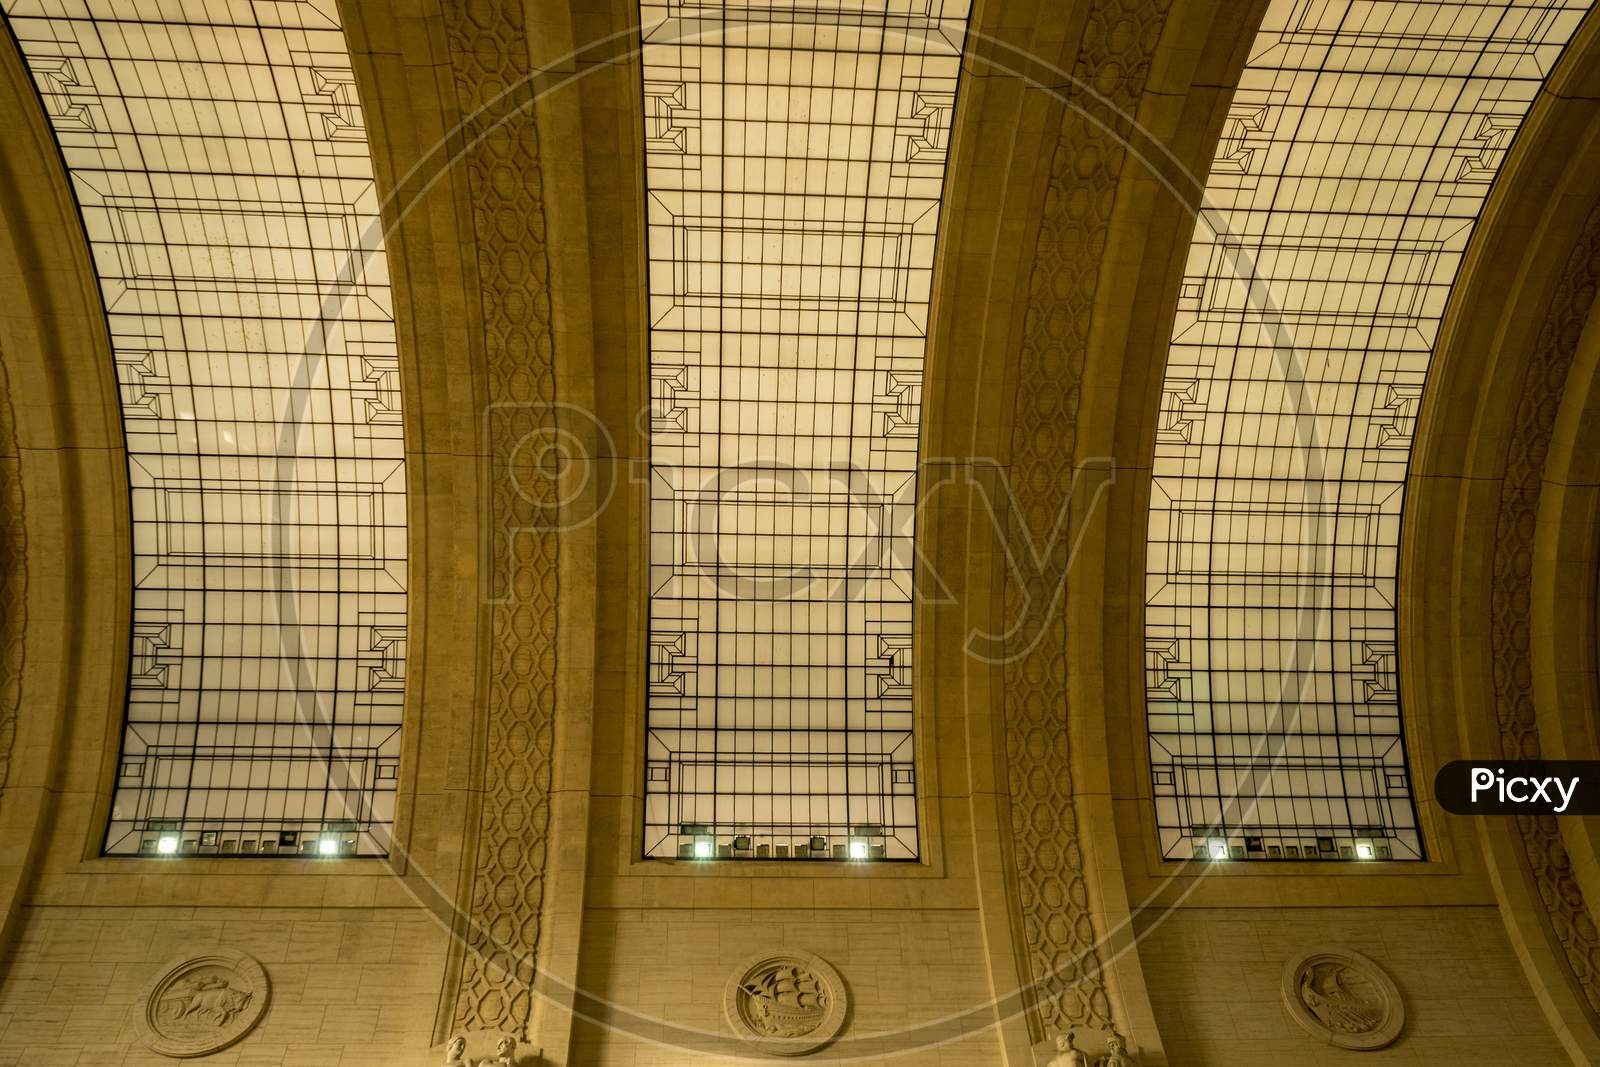 Milan Central Station - March 31: The Interior Of Milan Central Railway Station On March 31, 2018 In Milan, Italy. The Milan Railway Station Is The Largest Train Station In Europe By Volume